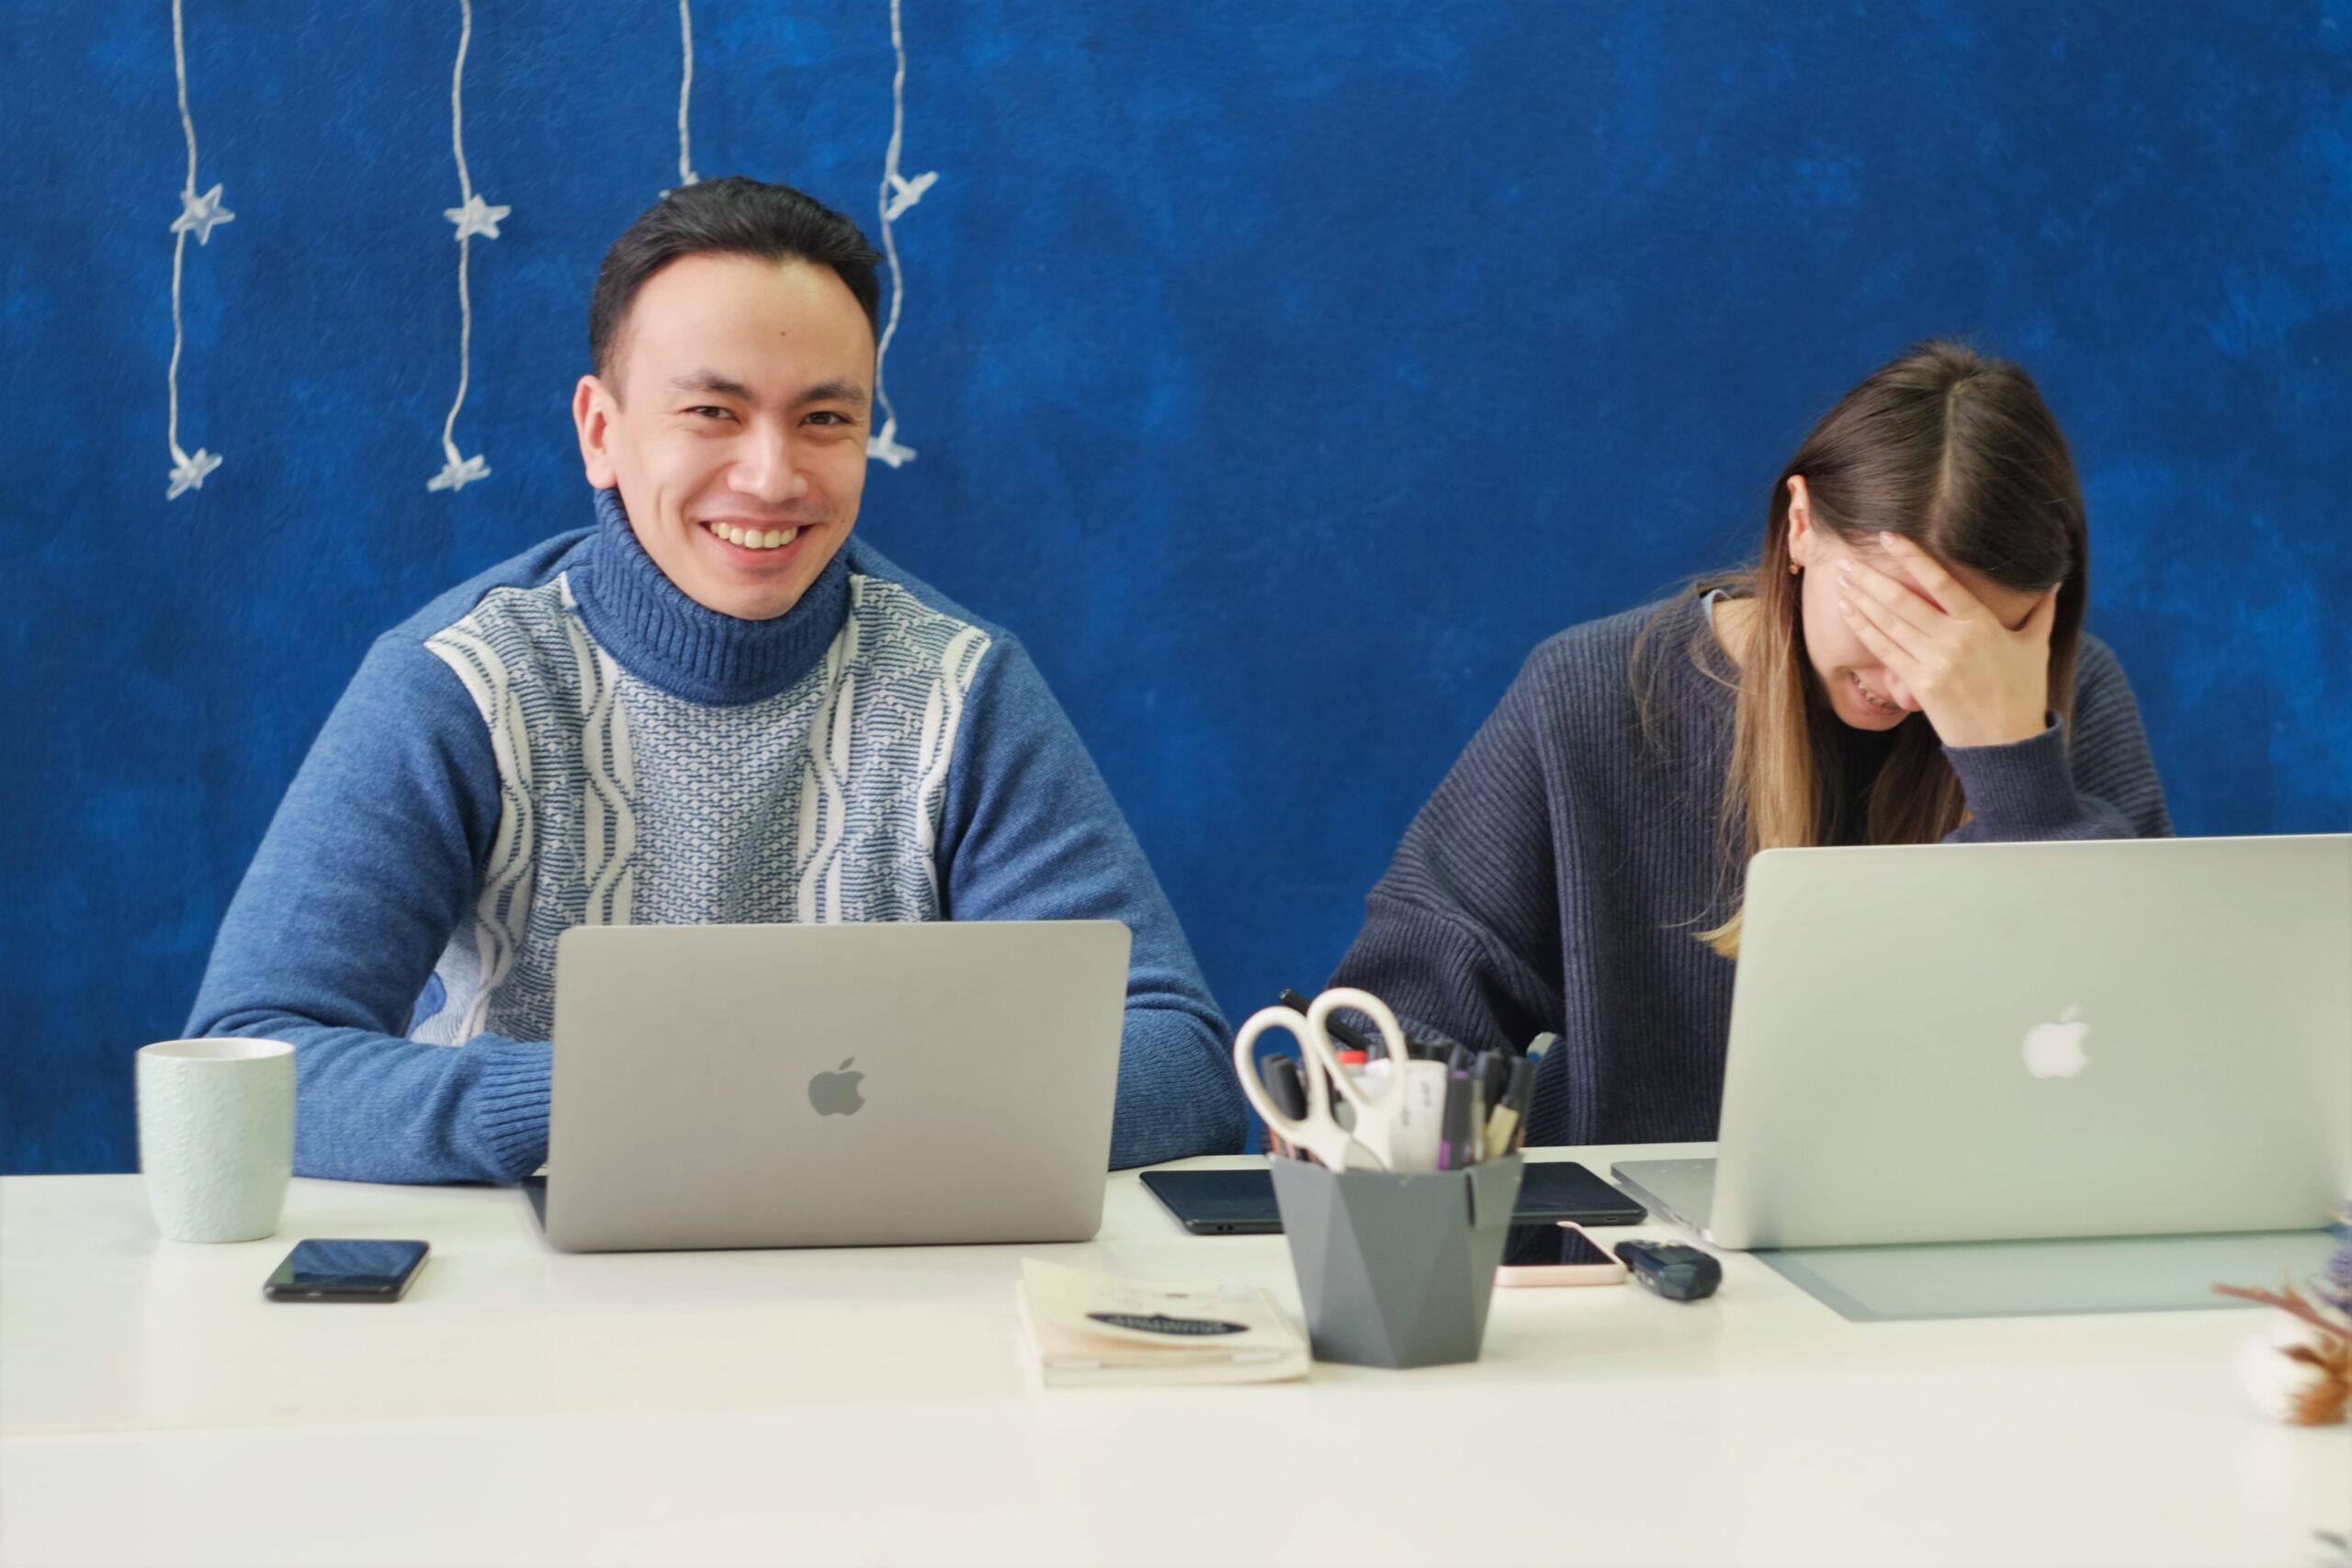 Two businesspeople are interviewing for a cultural fit. Man on the left is grinning happily from behind a laptop, woman on the right has her hand over her head and looks to be breaking out with laughter. Image by Aleksandra Sapozhnikova